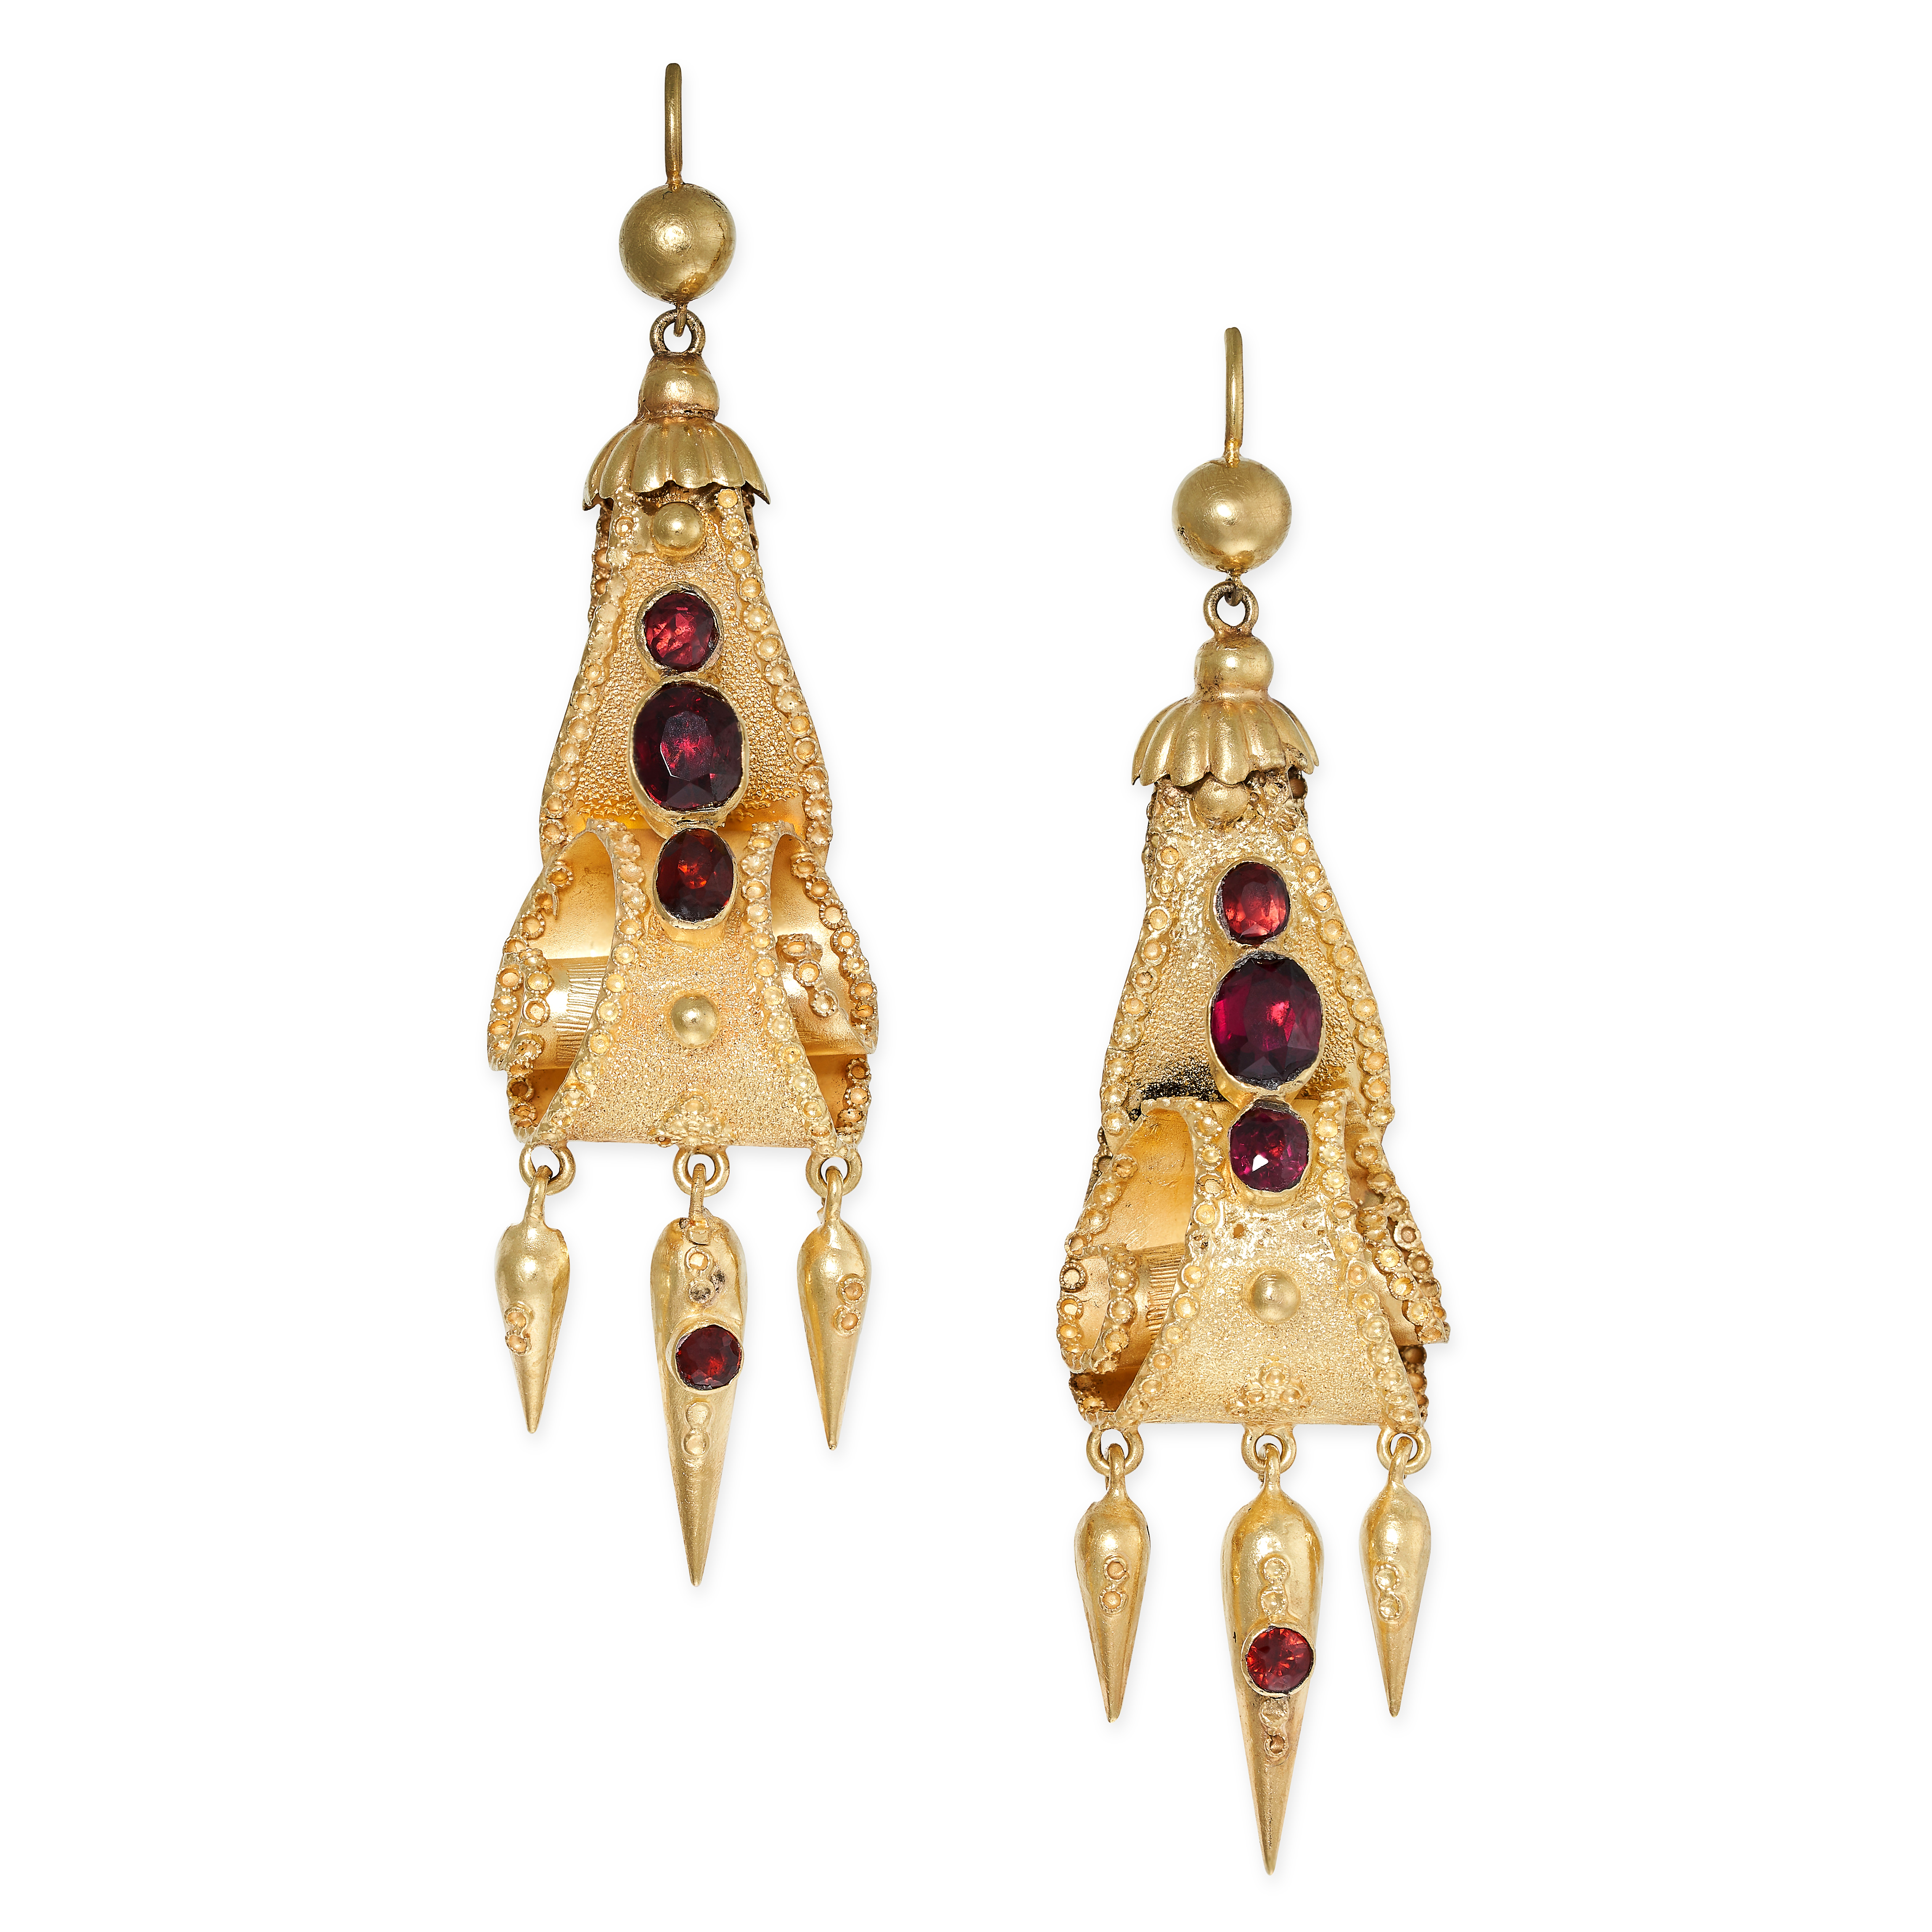 A PAIR OF ANTIQUE GARNET TASSEL DROP EARRINGS, 19TH CENTURY in high carat yellow gold, the scrolling